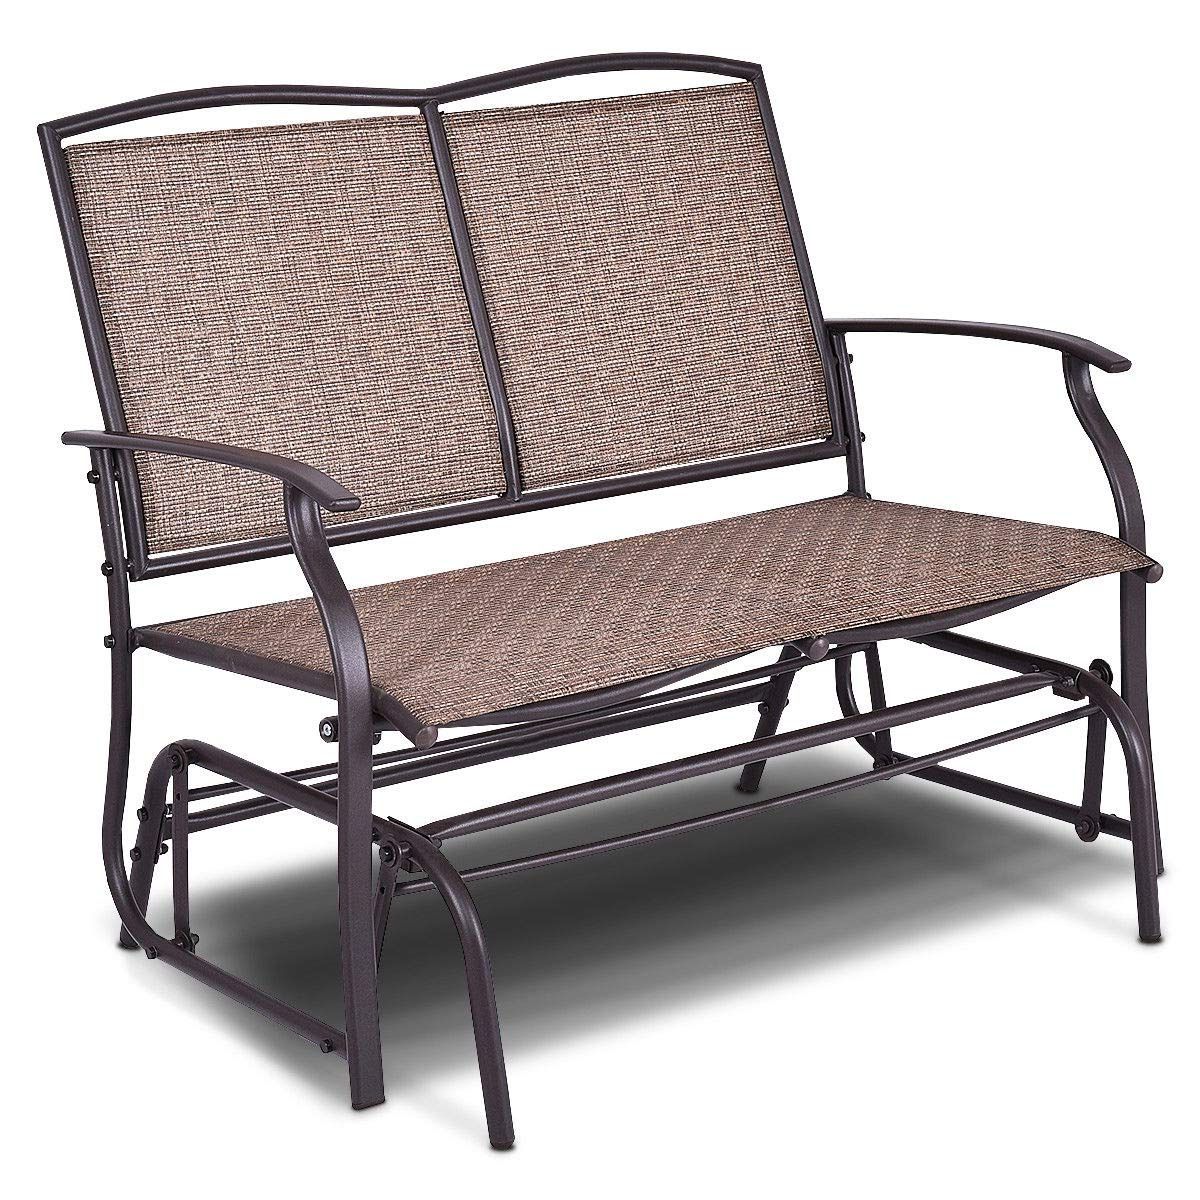 2020 Amazon : Allbest2you Double Patio Bench Garden Backyard With Regard To Iron Double Patio Glider Benches (View 9 of 30)